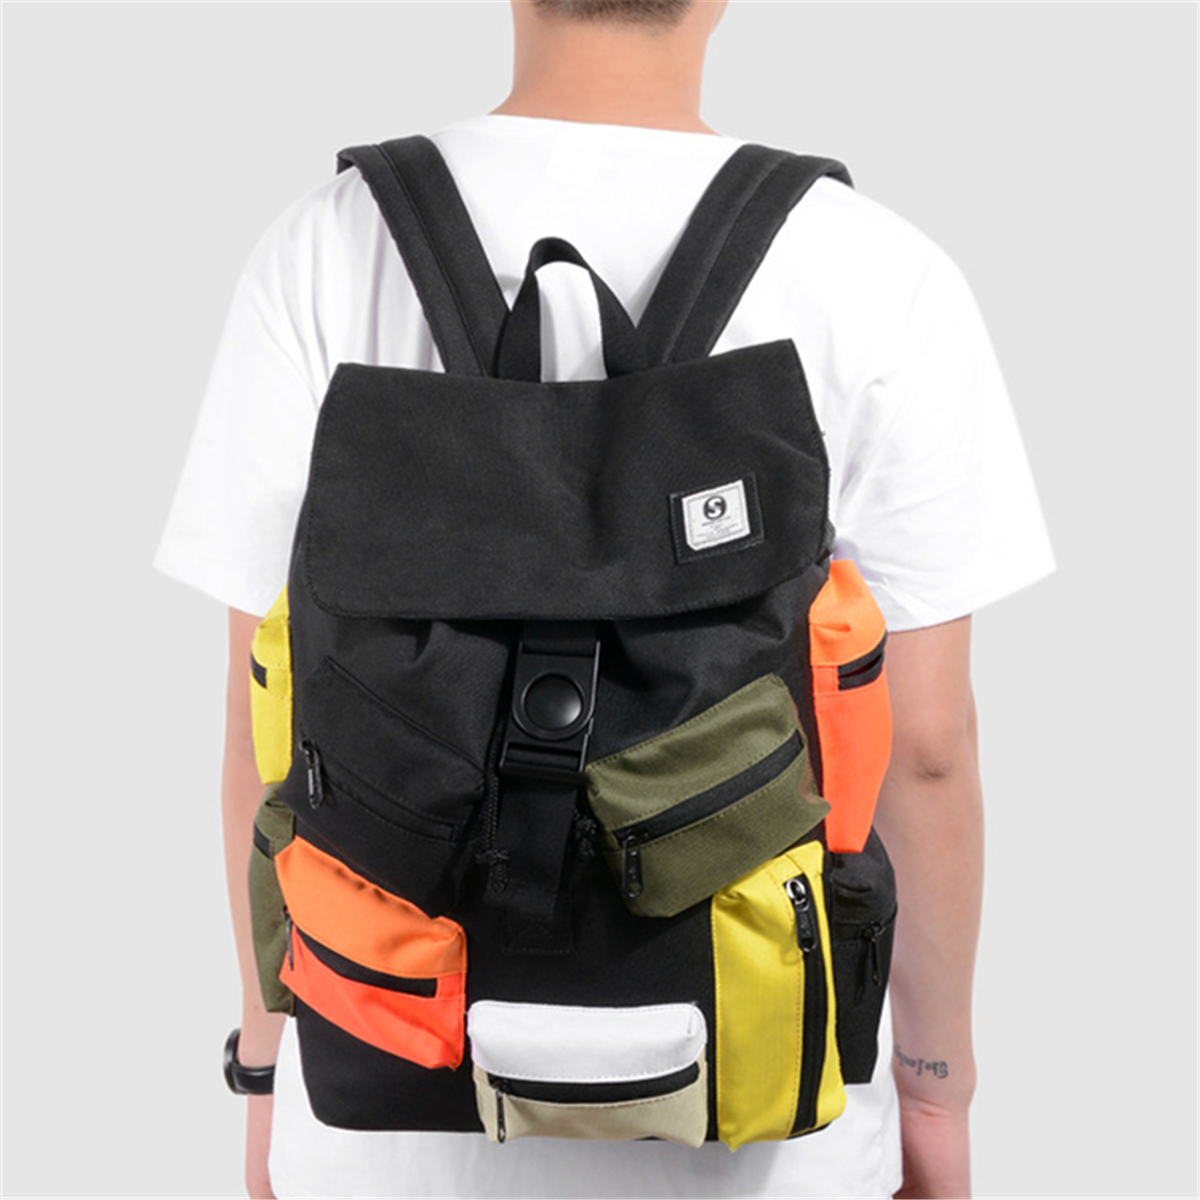 

Men Multifunctional USB Fashion Colorful Backpack Outdoor